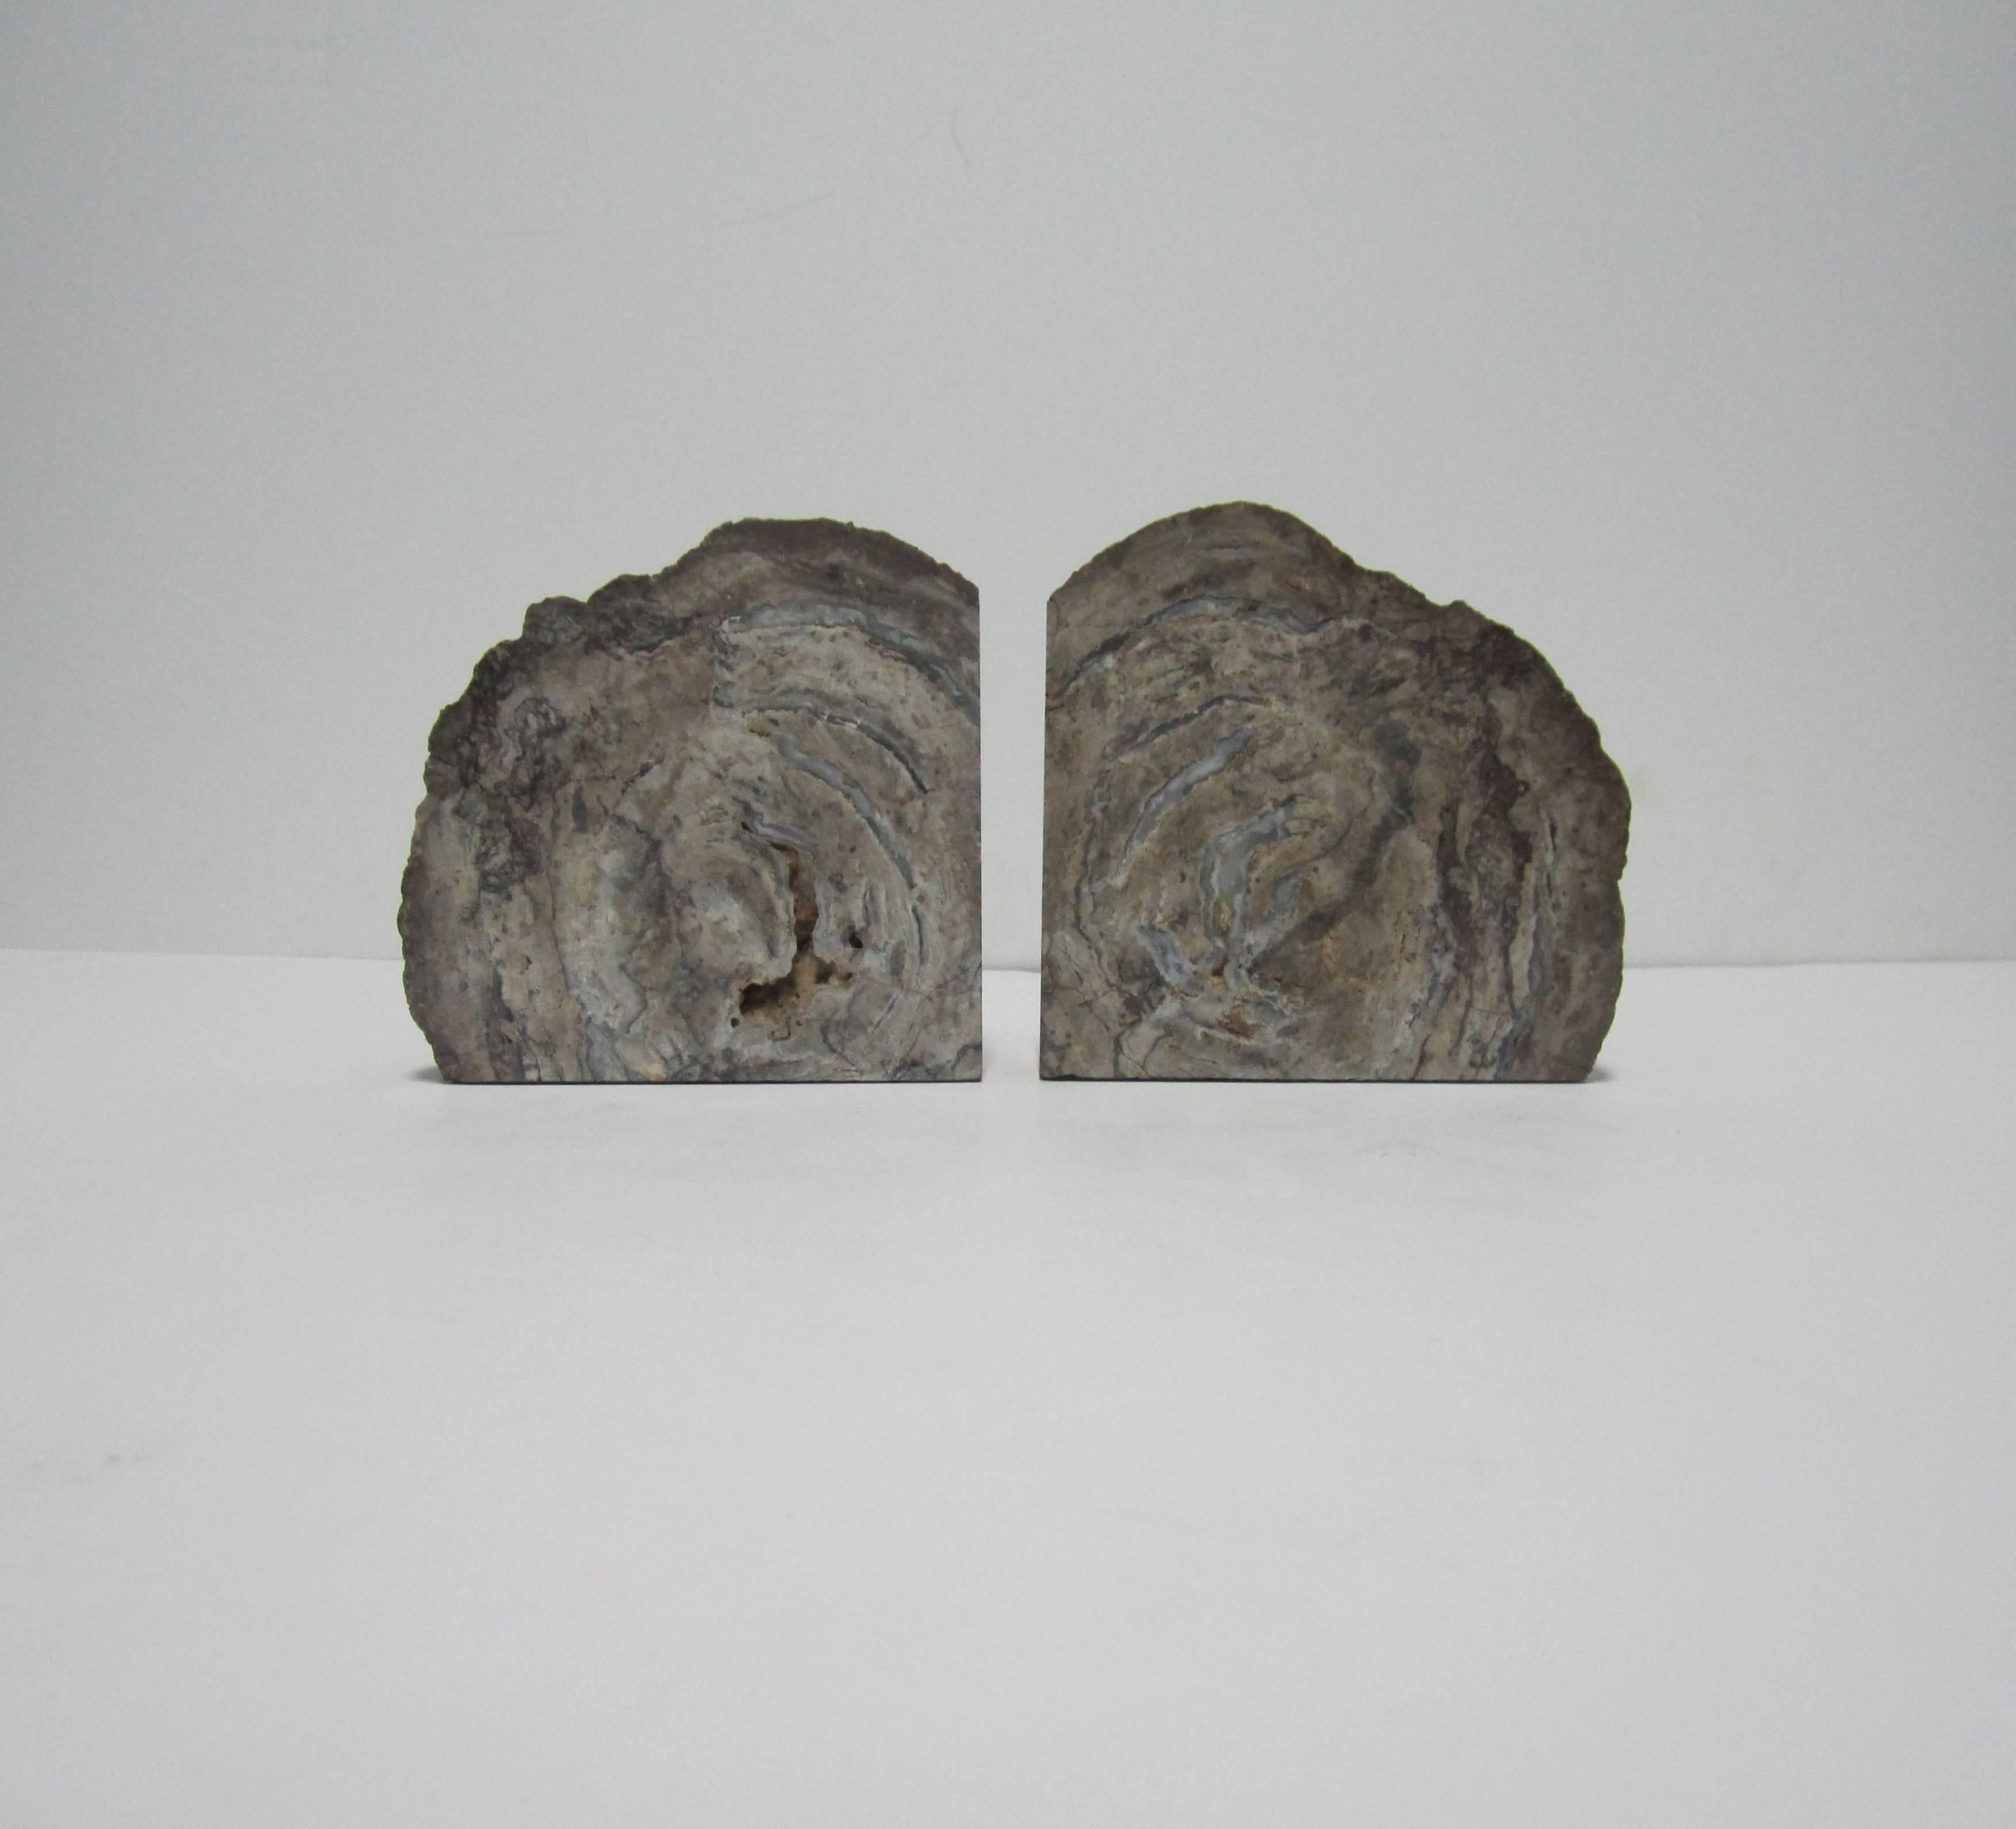 A beautiful pair of vintage natural crystal grey geode bookends. Colors include grey, gray and taupe. Pair available here online. By request, pair can be made available by appointment to the trade (in New York.)